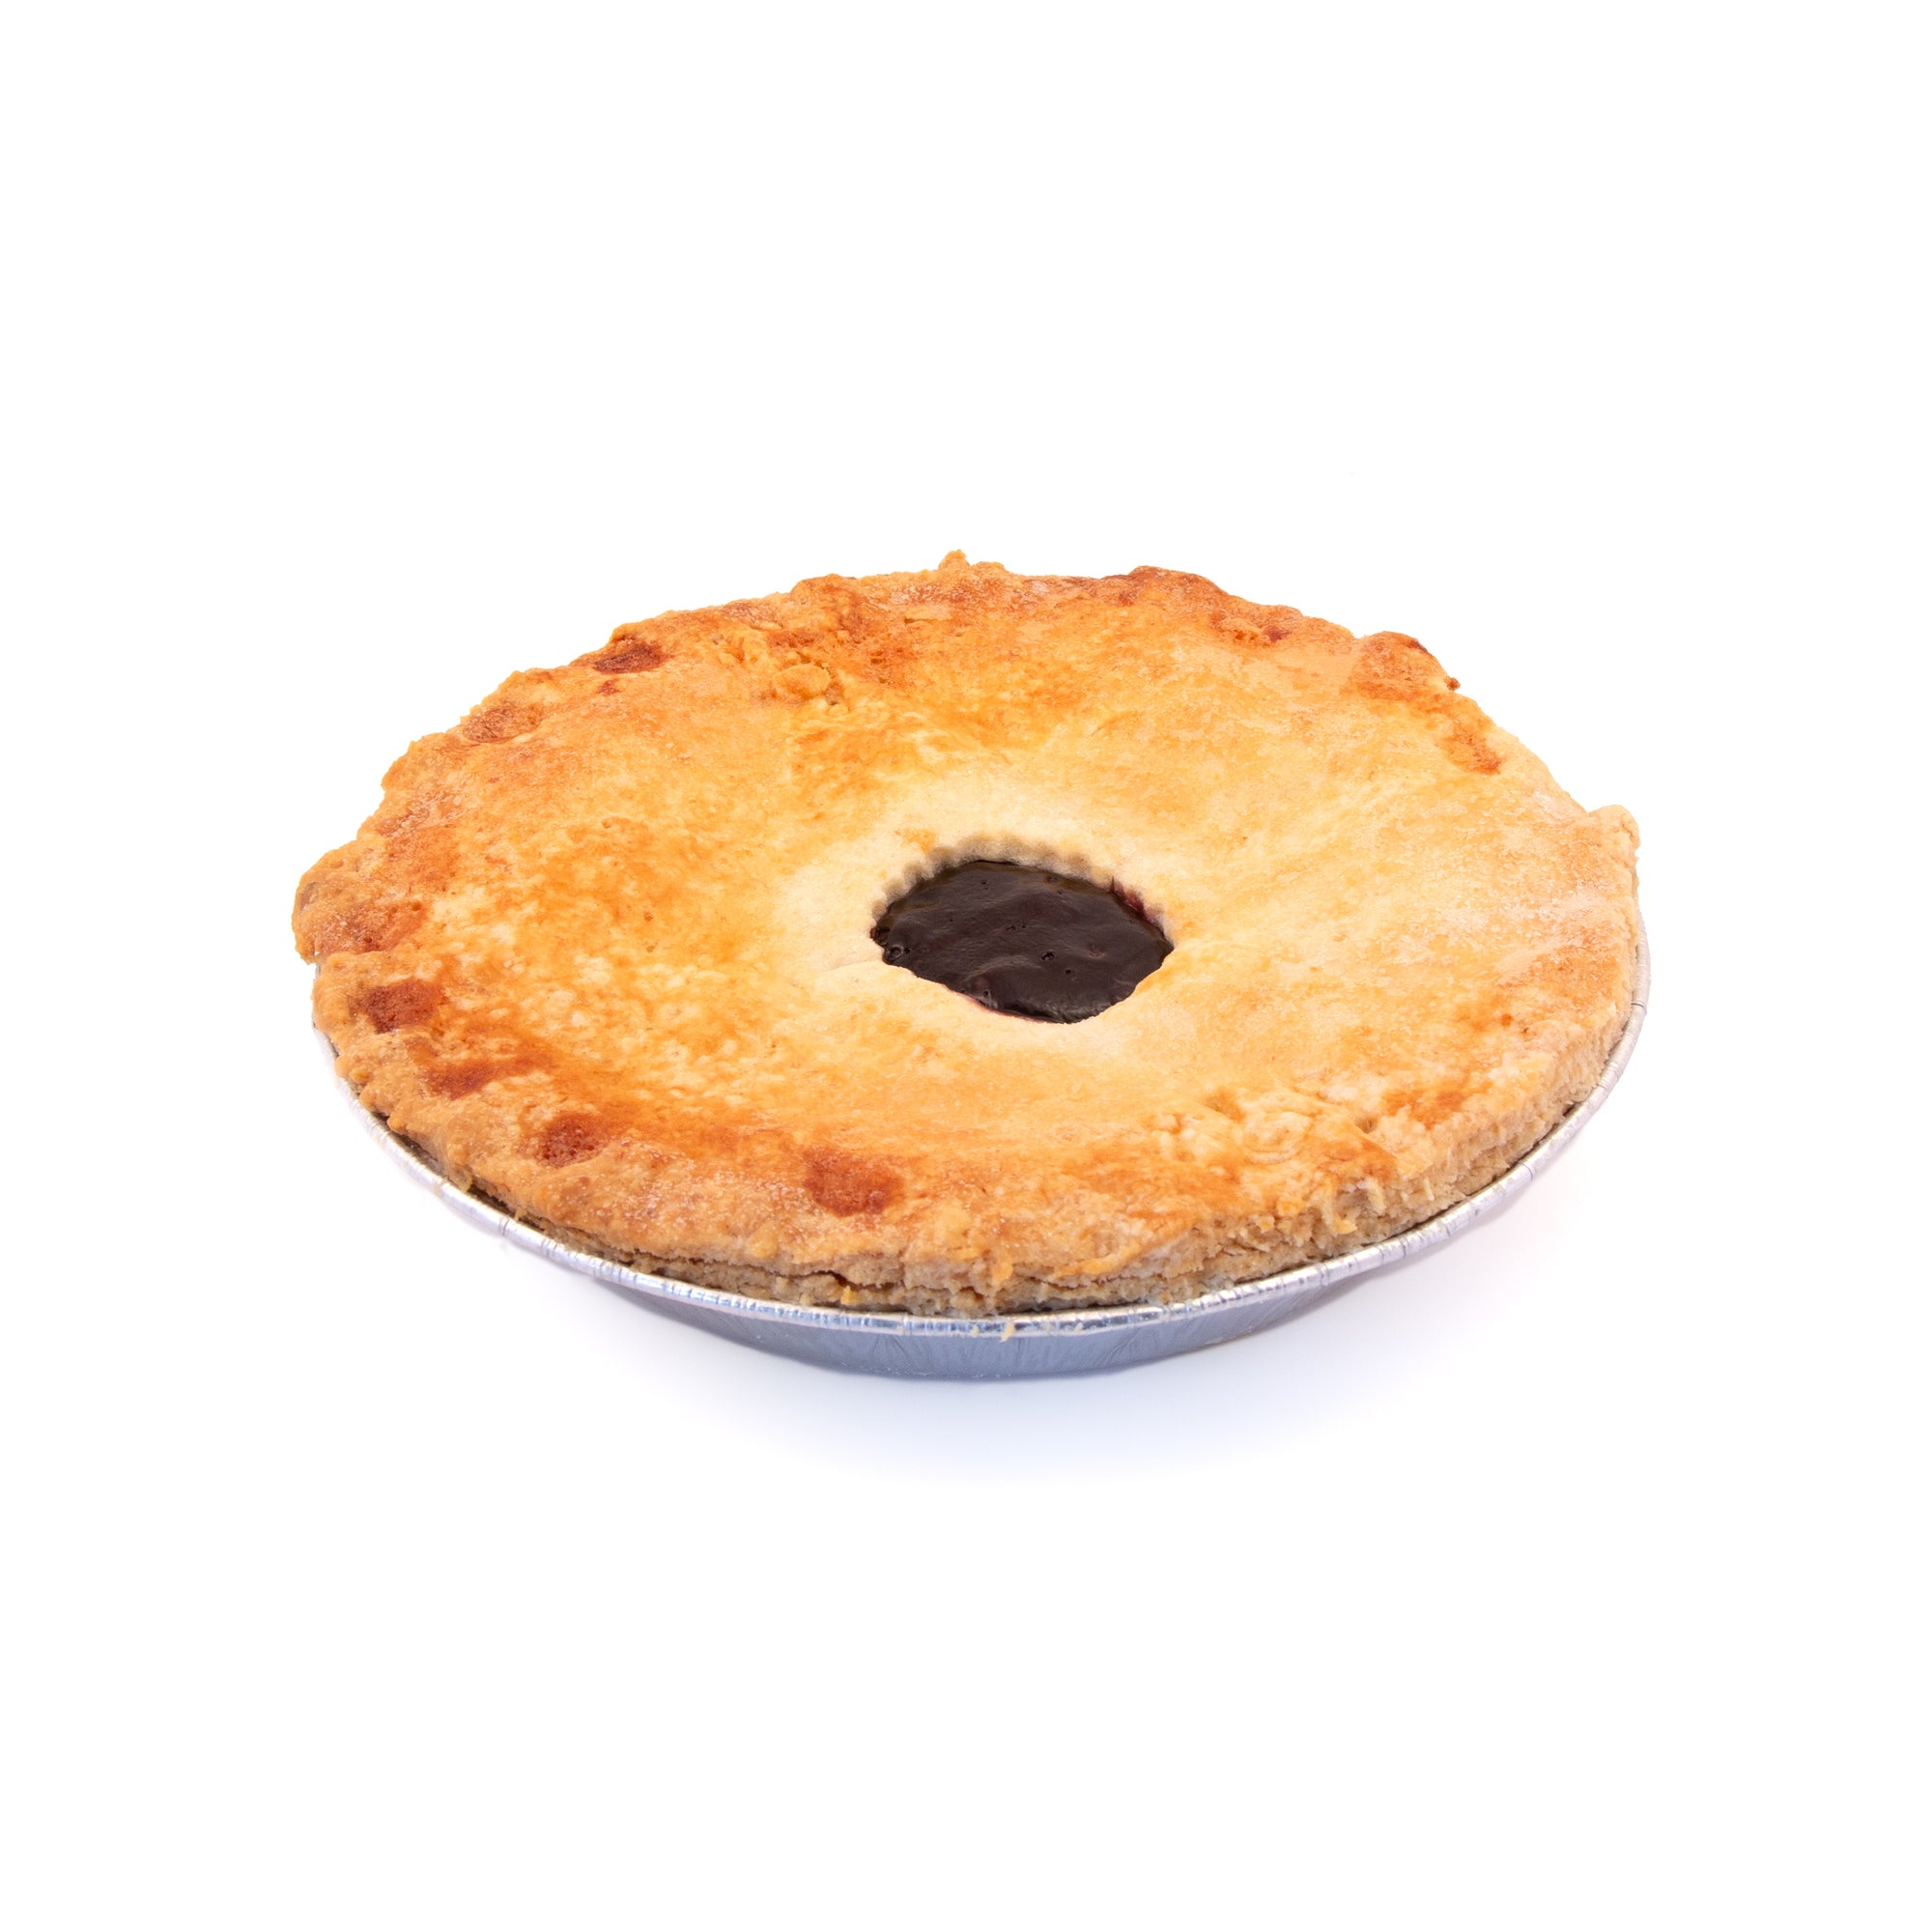 Baked Blueberry Pie